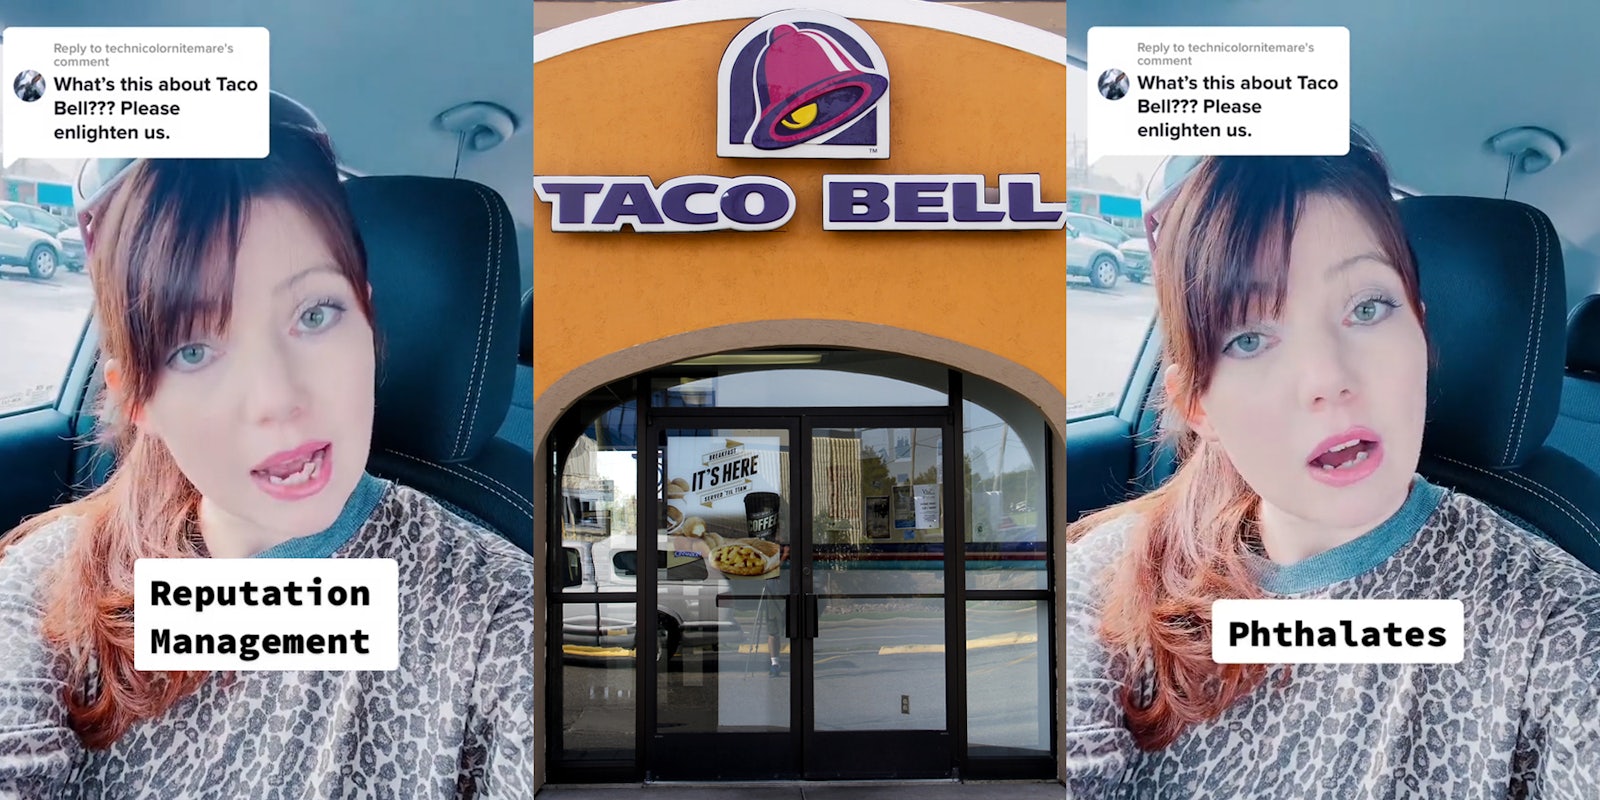 woman speaking in car caption 'What's this about Taco Bell??? Please enlighten us.' 'Reputation Management' (l) Taco Bell doorway with sign (c) woman speaking in car caption 'What's this about Taco Bell??? Please enlighten us.' 'Phthalates' (r)